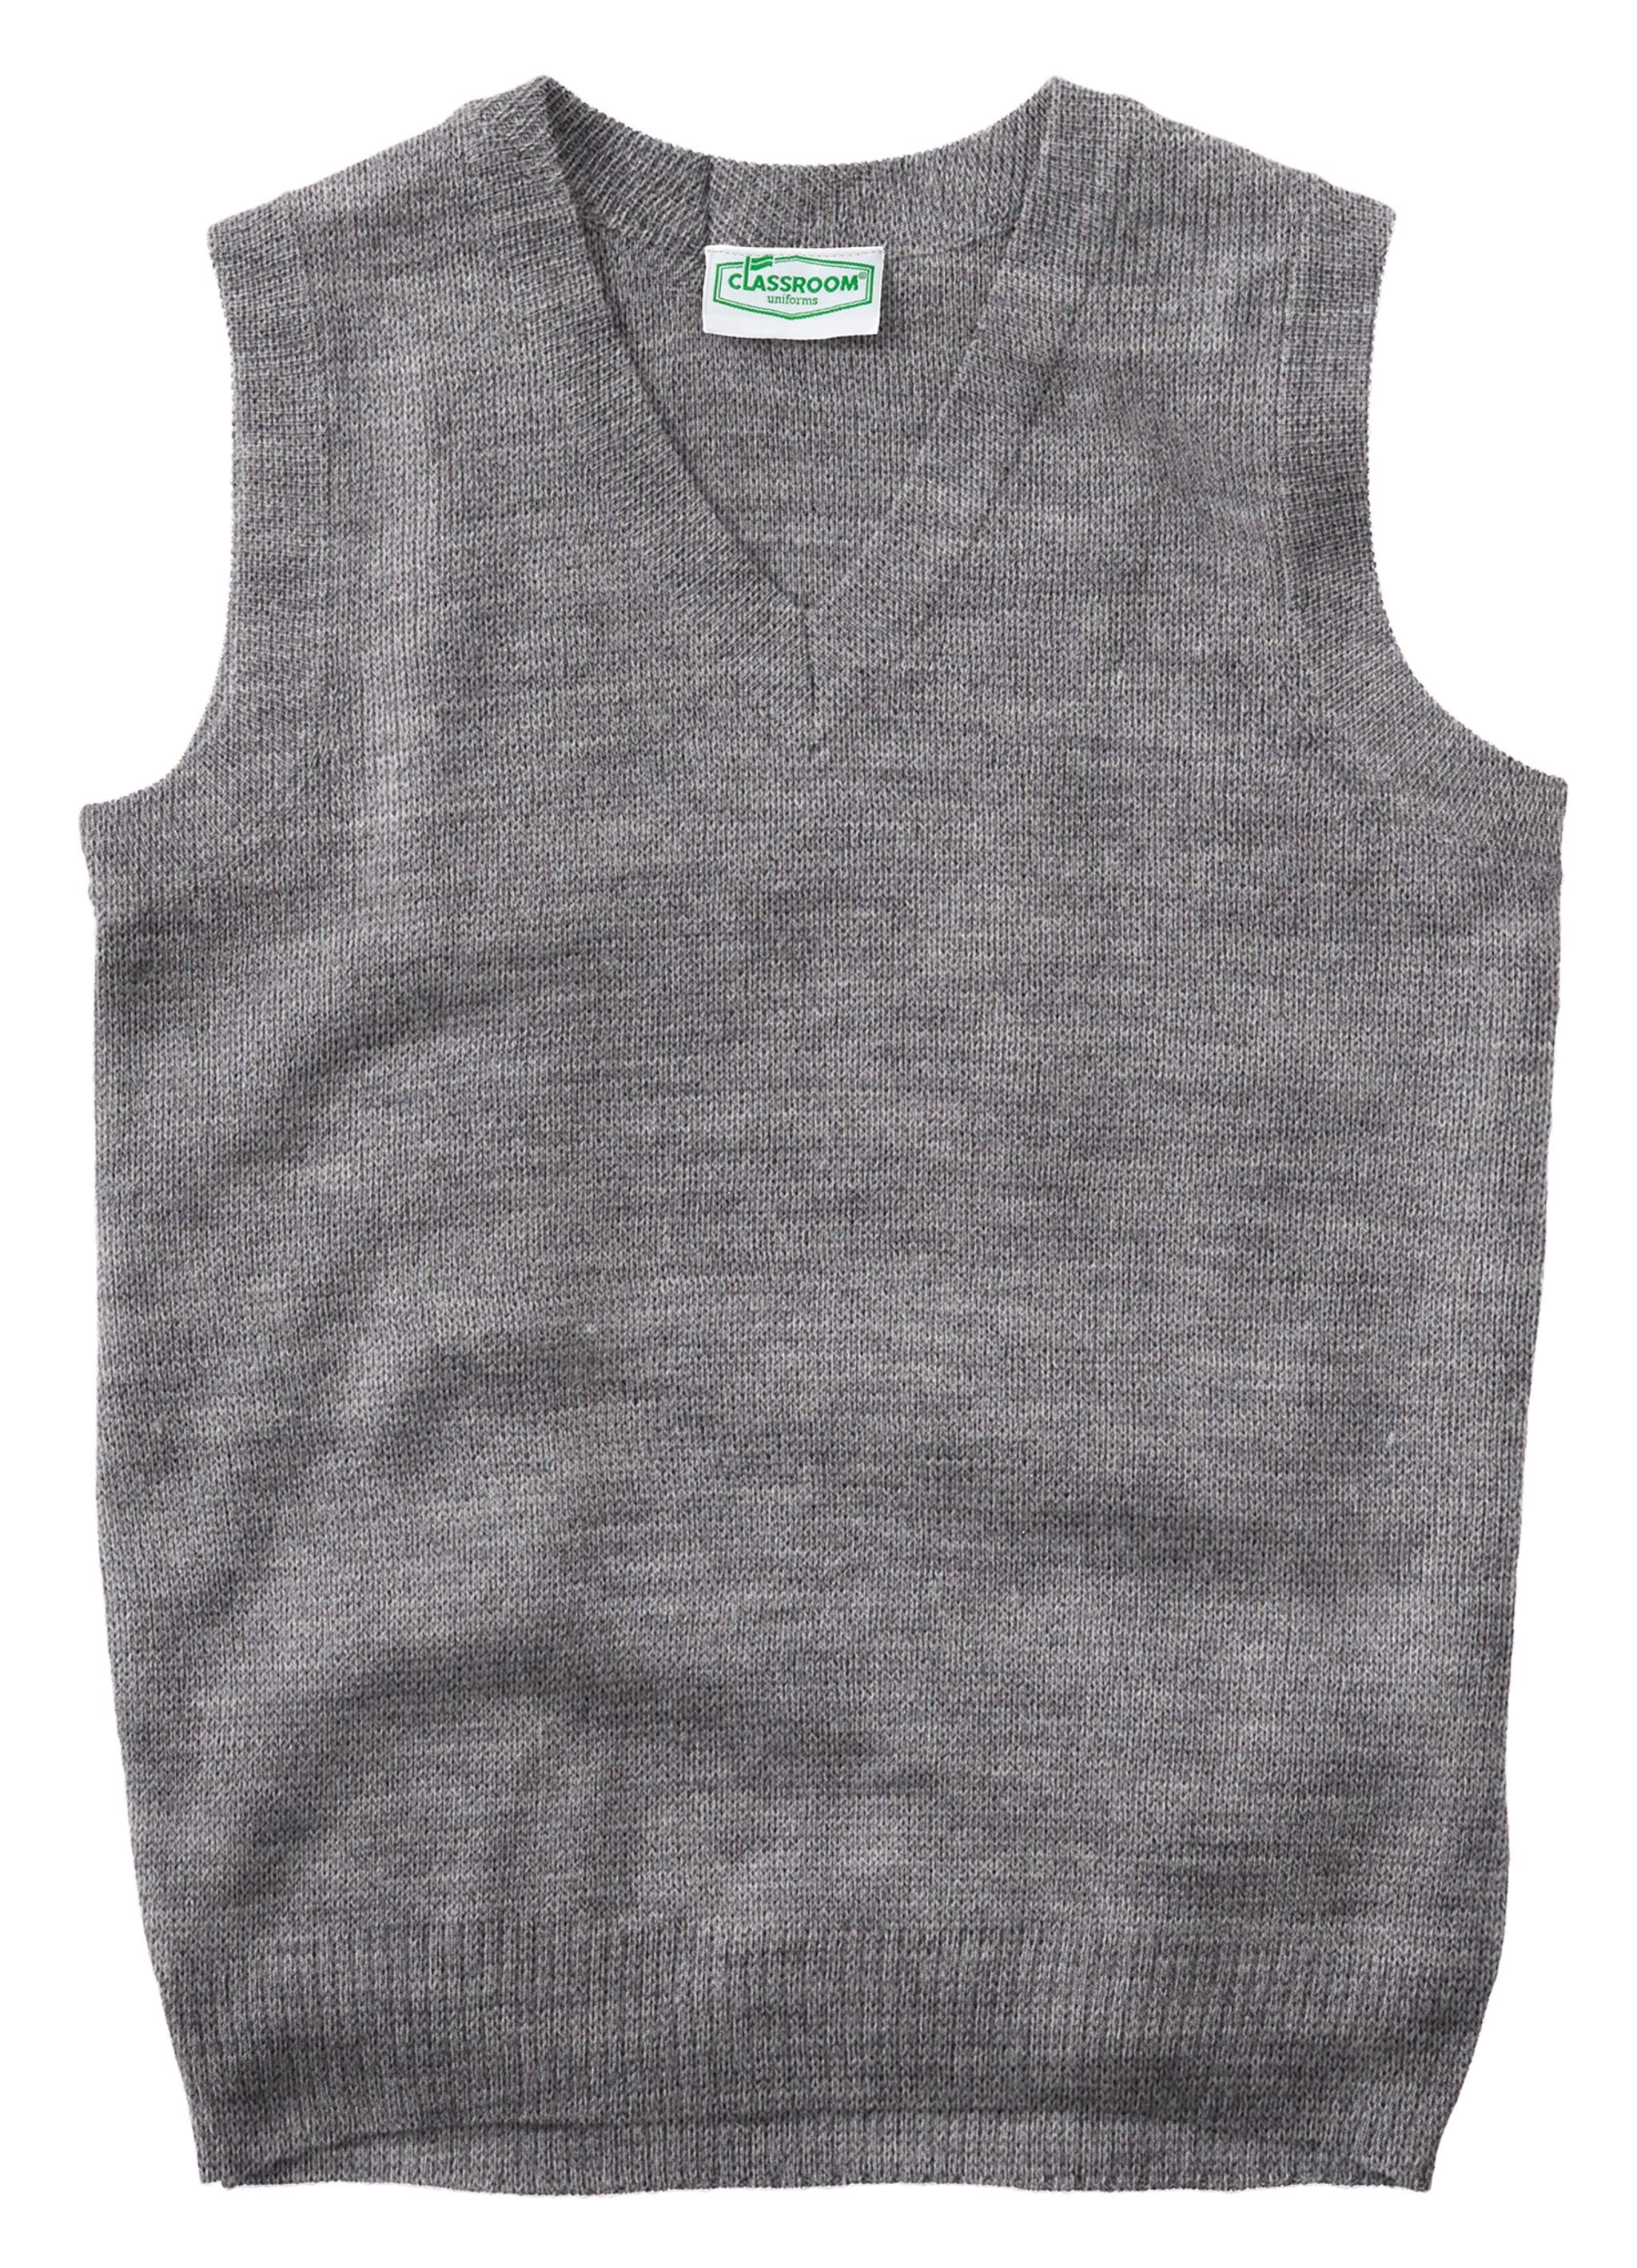 100% Acrylic Adult sweater vest with logo